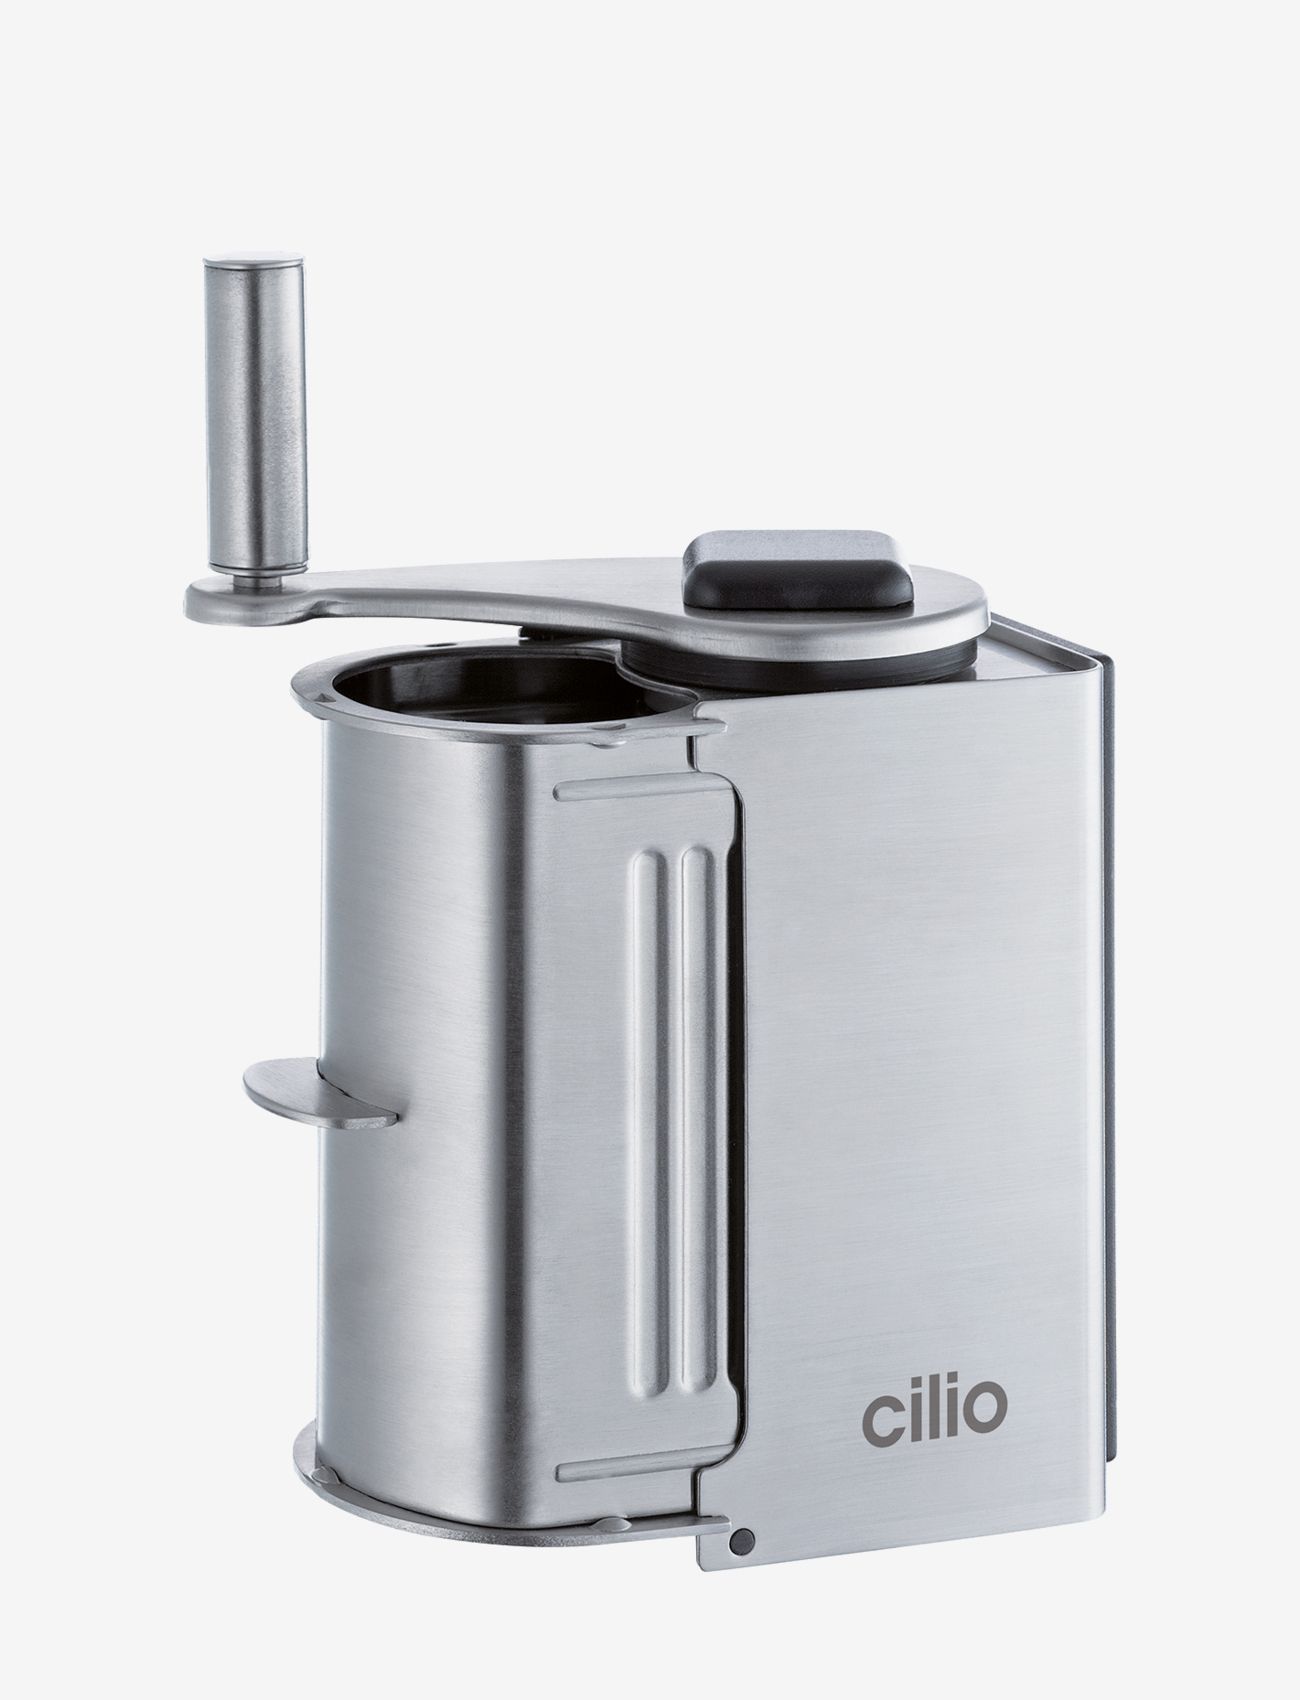 cilio - Cheese grater DELUXE FORMAGGIO - rivjern - satin stainless steel - 0